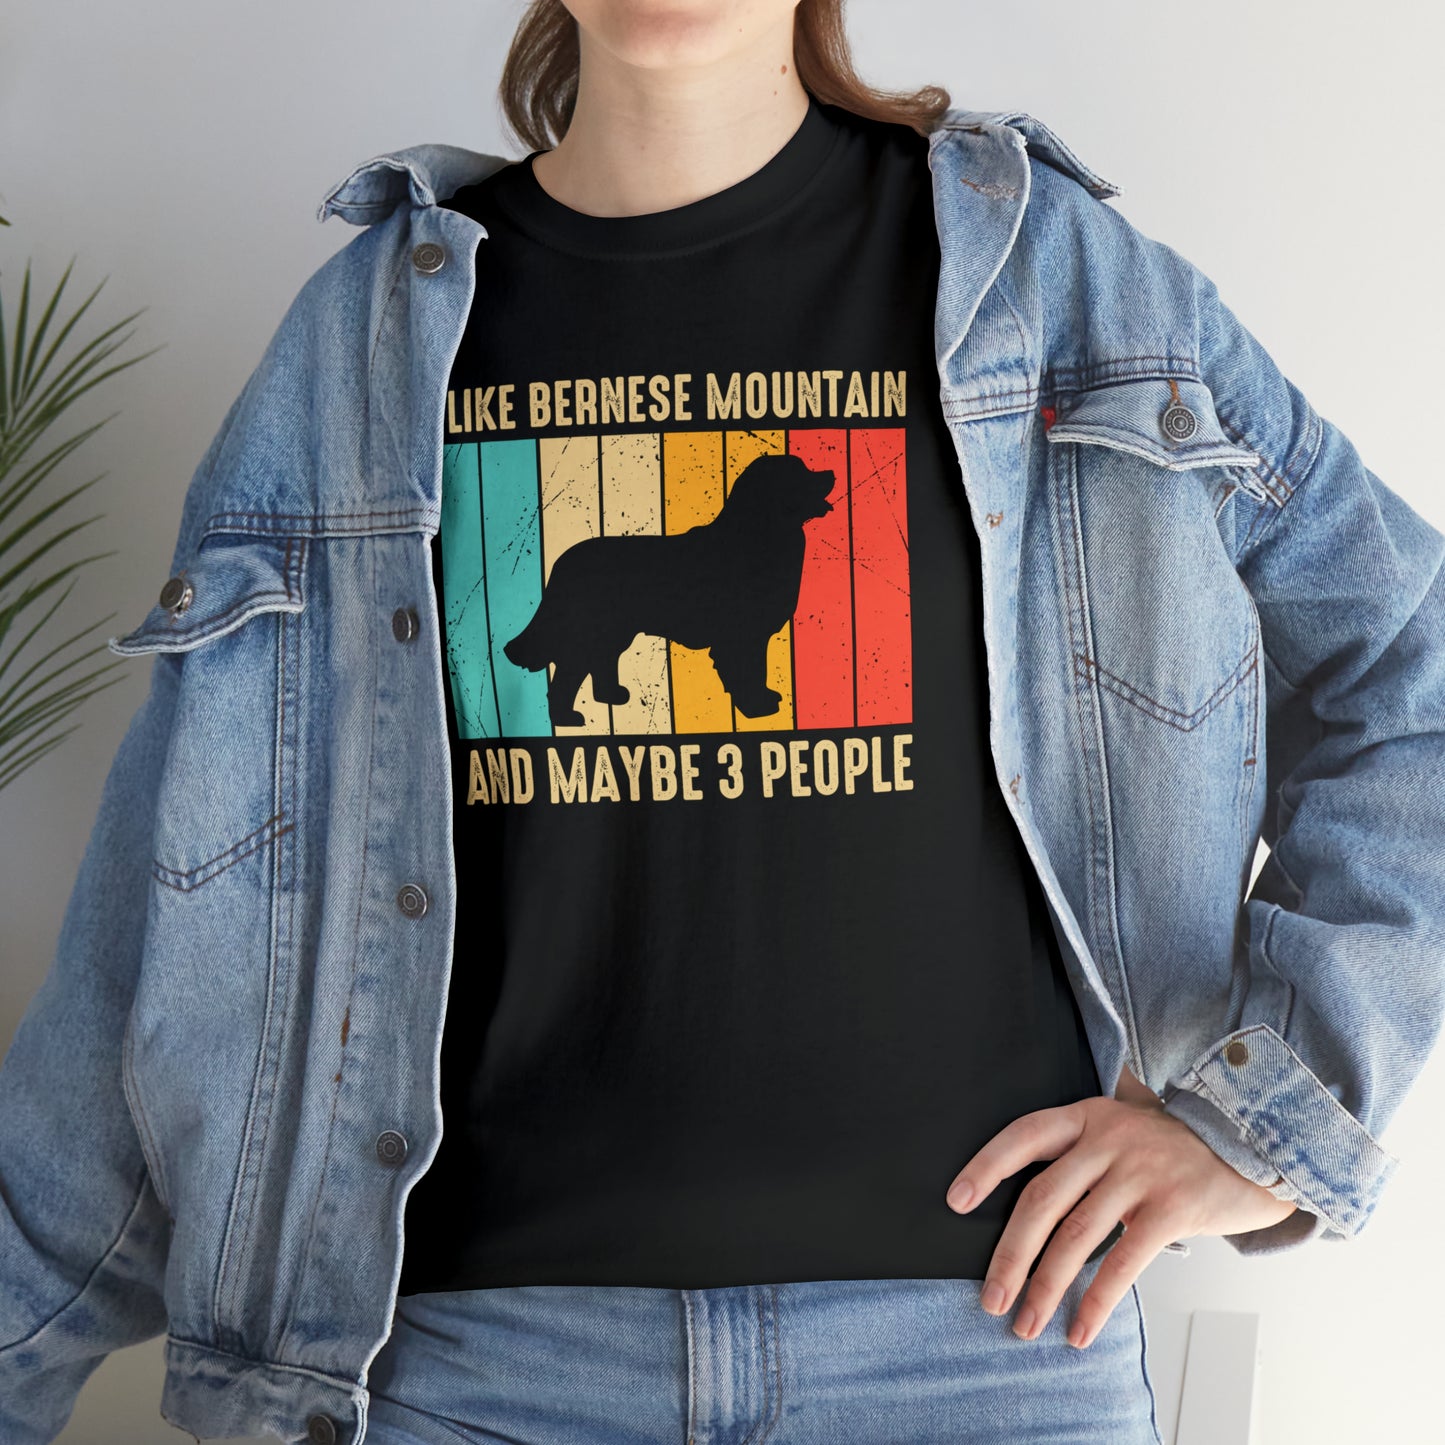 "Bernese Mountain Dog & 3 People" T-Shirt - Weave Got Gifts - Unique Gifts You Won’t Find Anywhere Else!